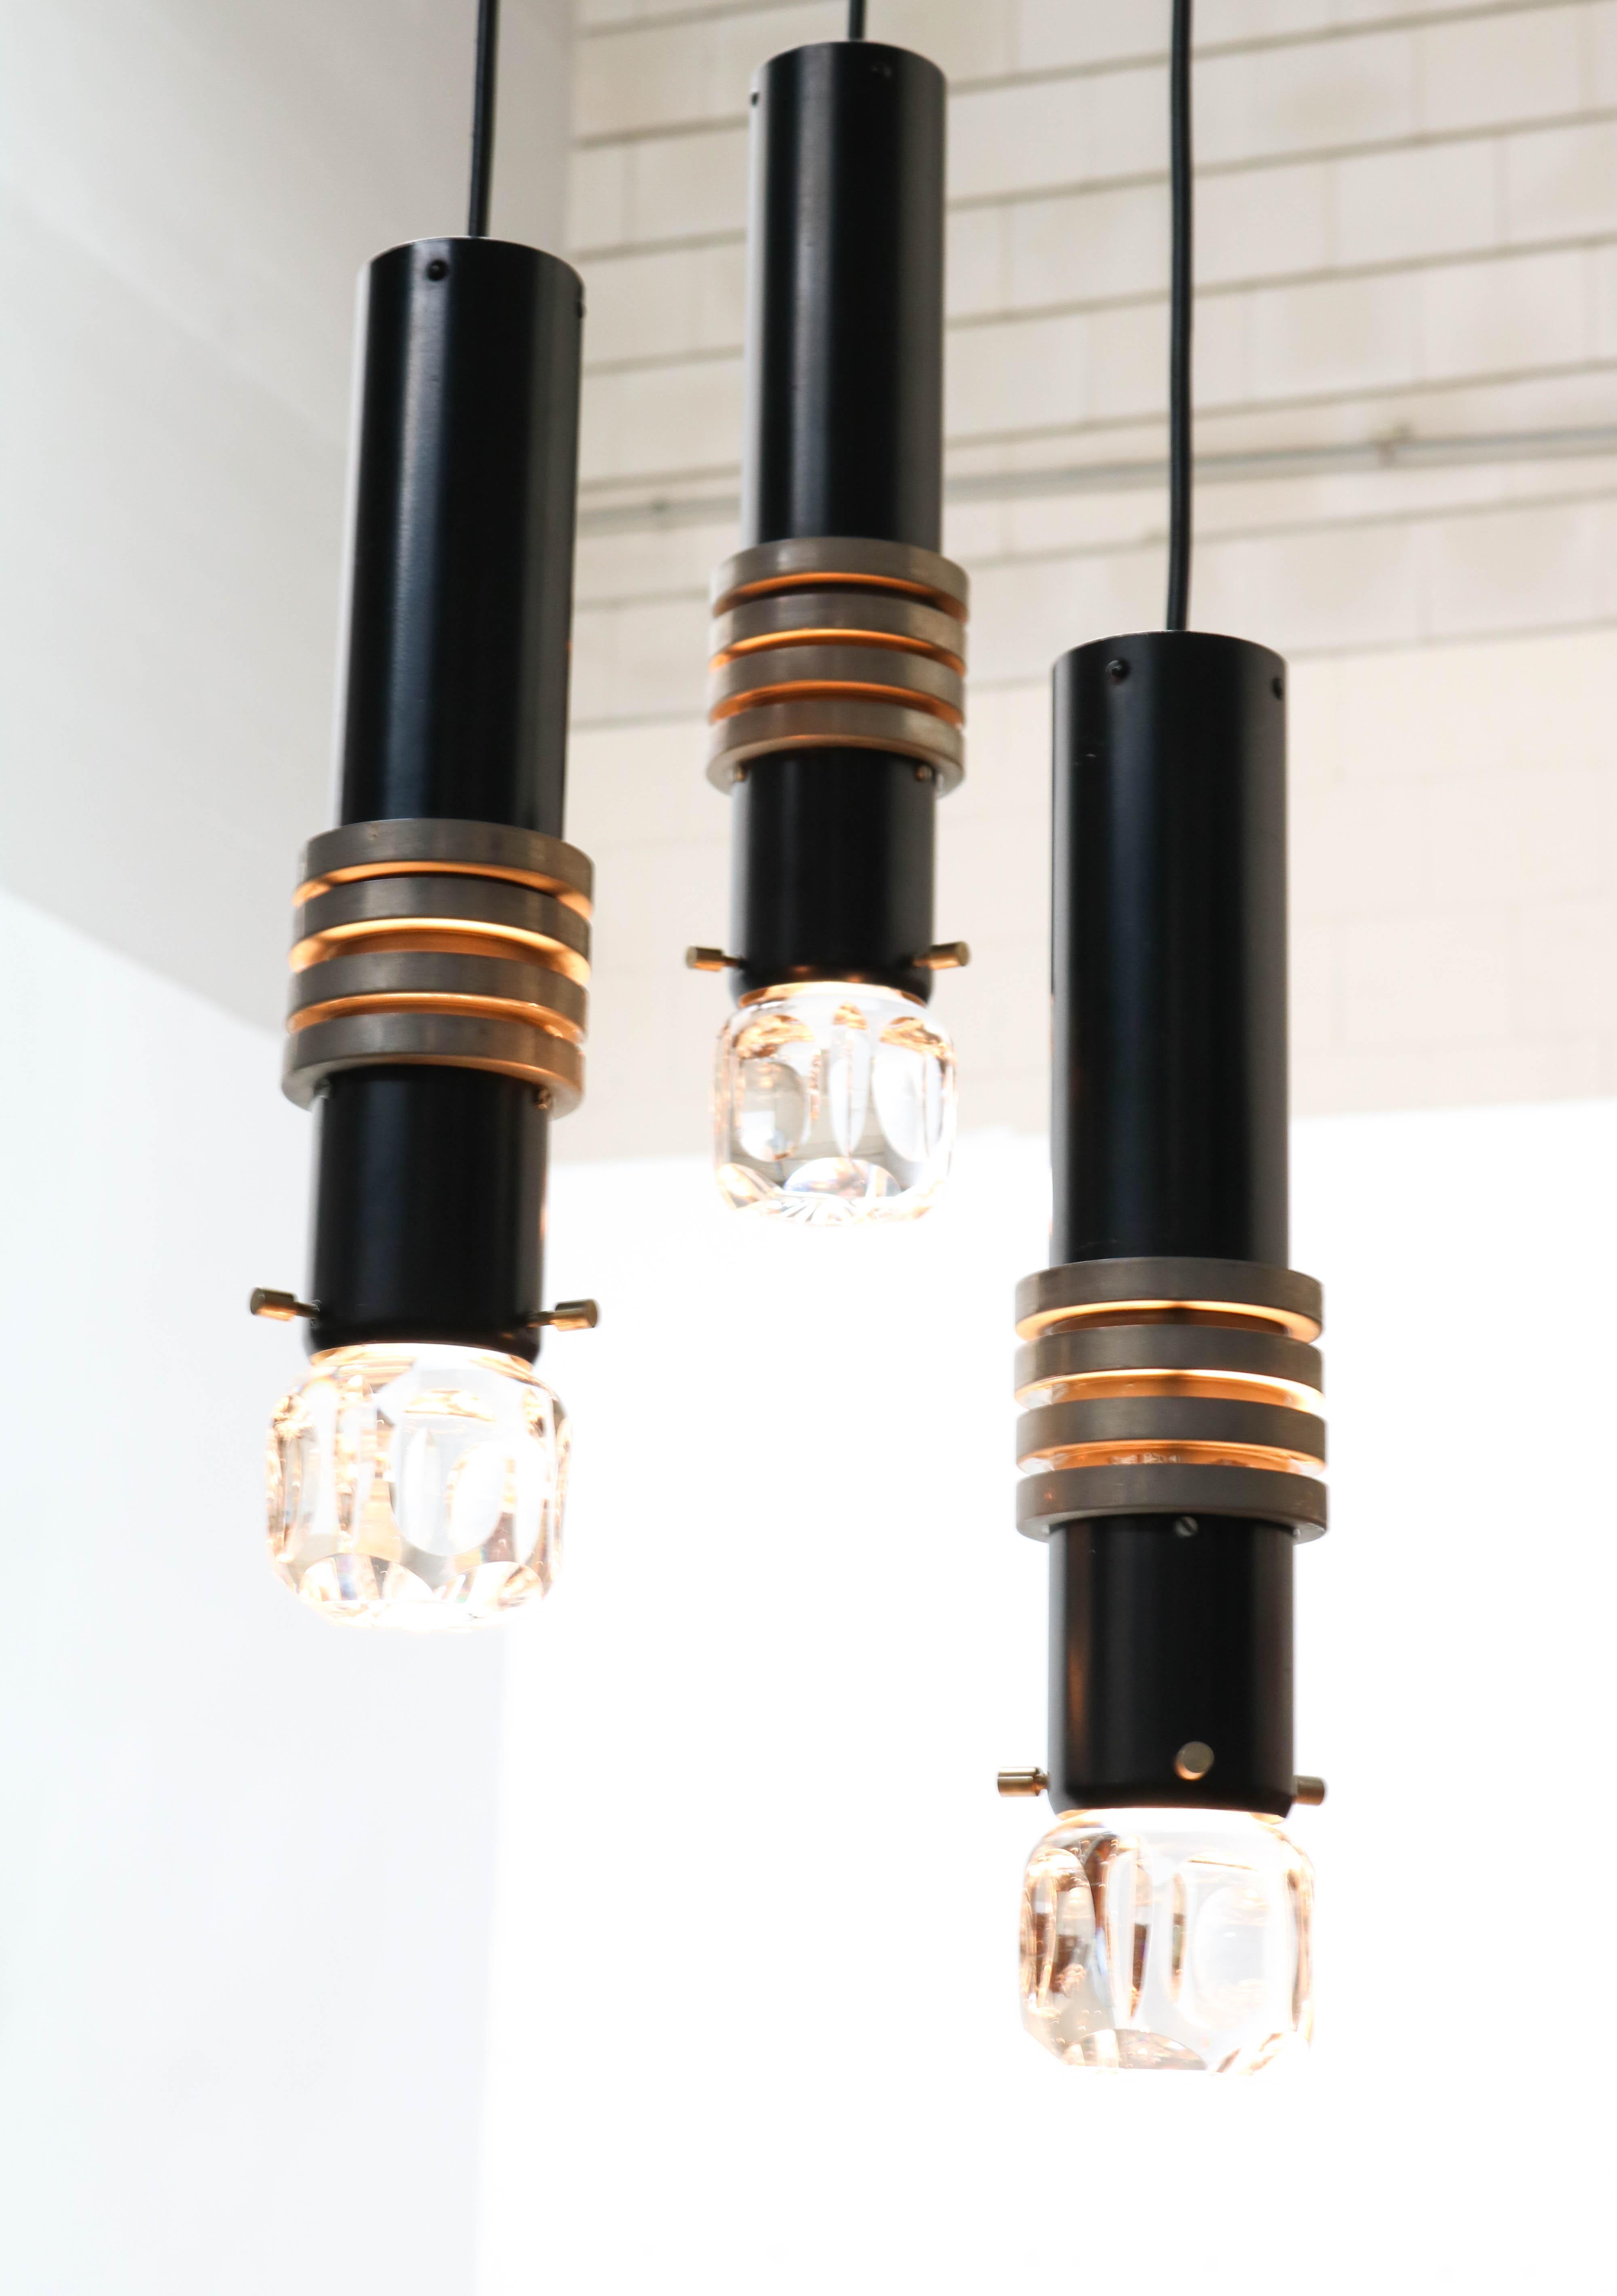 Wonderful Mid-Century Modern cascade pendant light.
Design by Lakro Amstelveen.
Striking Dutch design from the 1960s.
Black lacquered metal with original glass shades.
In good original condition with a beautiful patina.